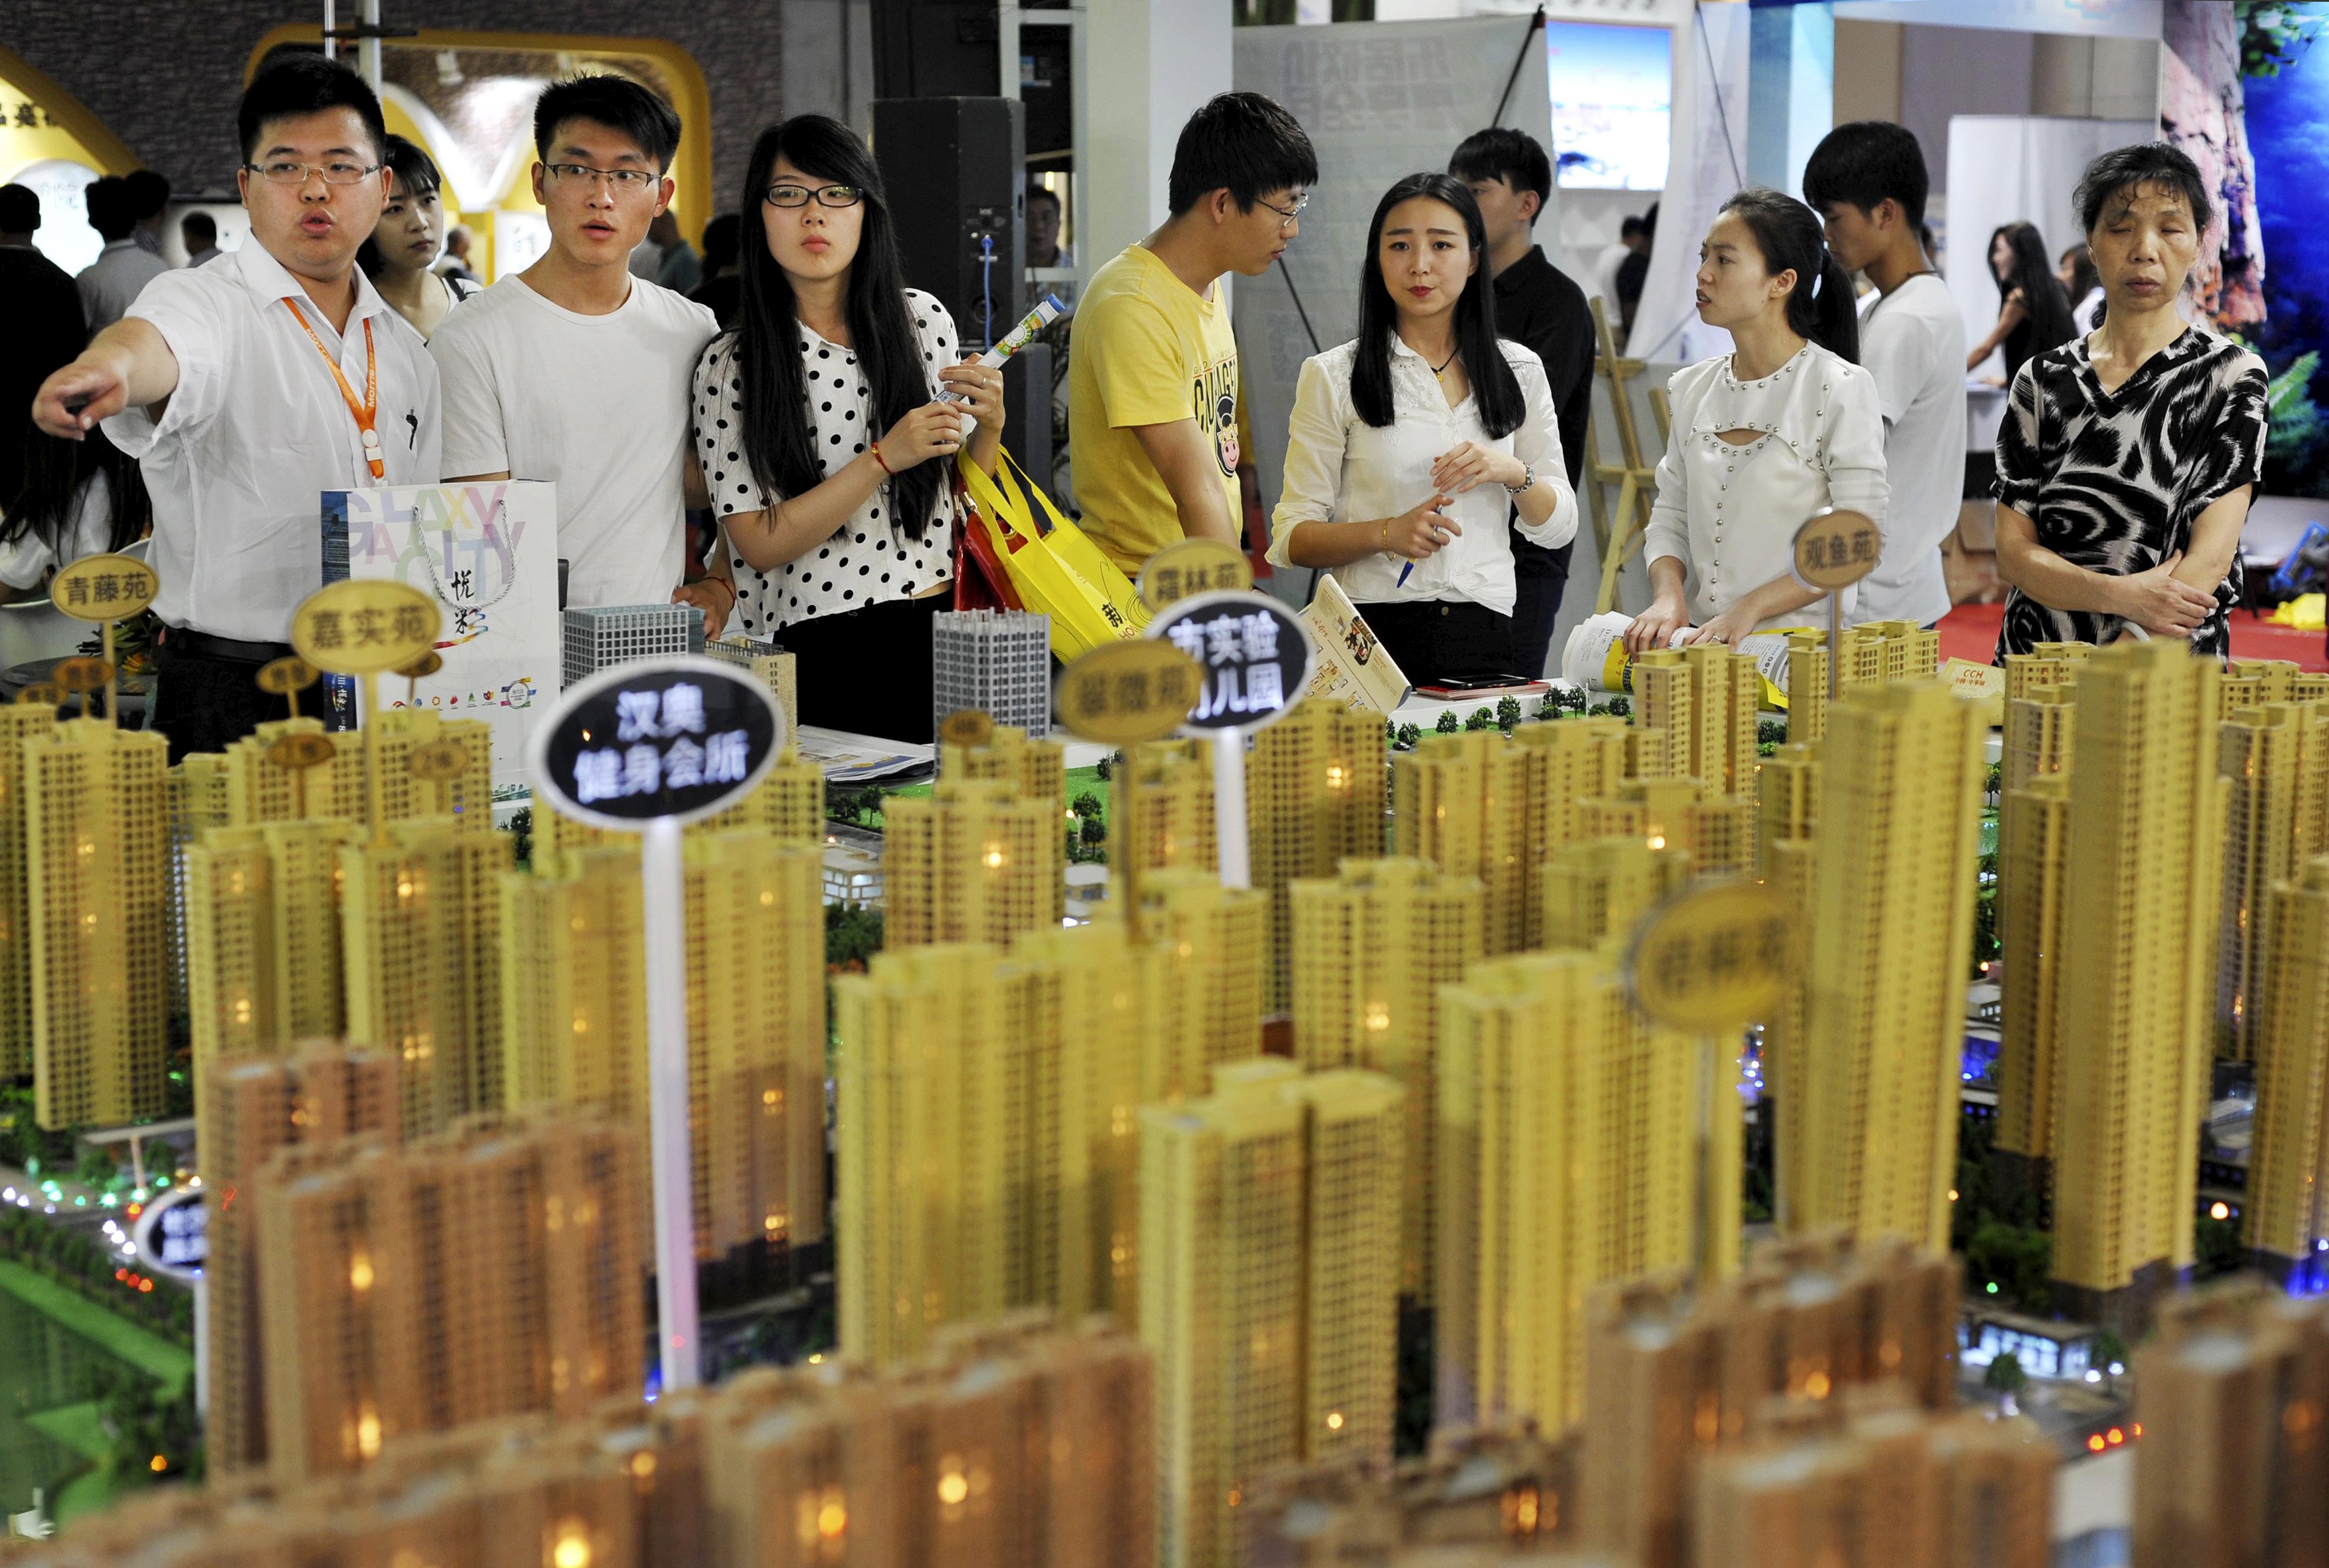 Sales representatives talk to potential buyers in front of a model of a residential complex at a real estate exhibition in Wuhan, Hubei province, China, May 10, 2015. Executives at nearly a dozen listed Chinese developers say they will ramp up investment in property this year thanks to Beijing's interest rate cuts, a vote of confidence from a sector accounting for 15 percent of economic growth. Picture taken May 10, 2015. REUTERS/Stringer CHINA OUT. NO COMMERCIAL OR EDITORIAL SALES IN CHINA